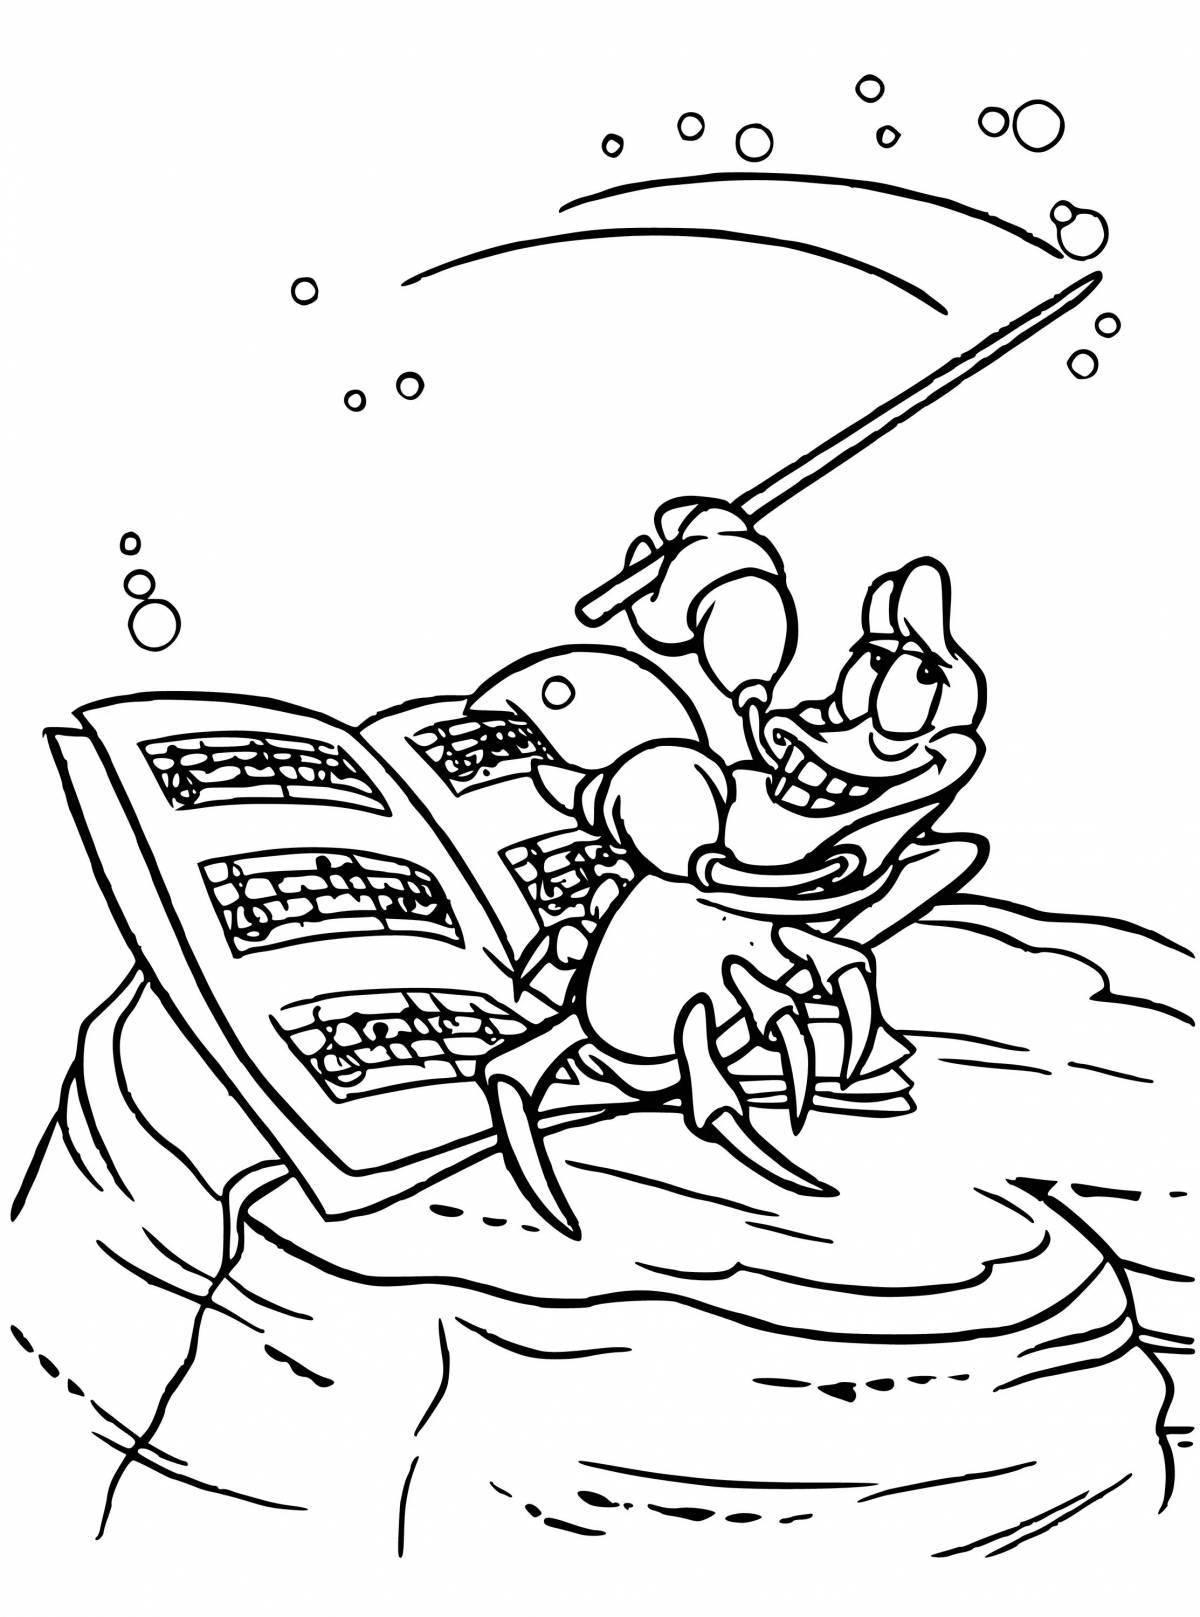 Coloring page playful conductor